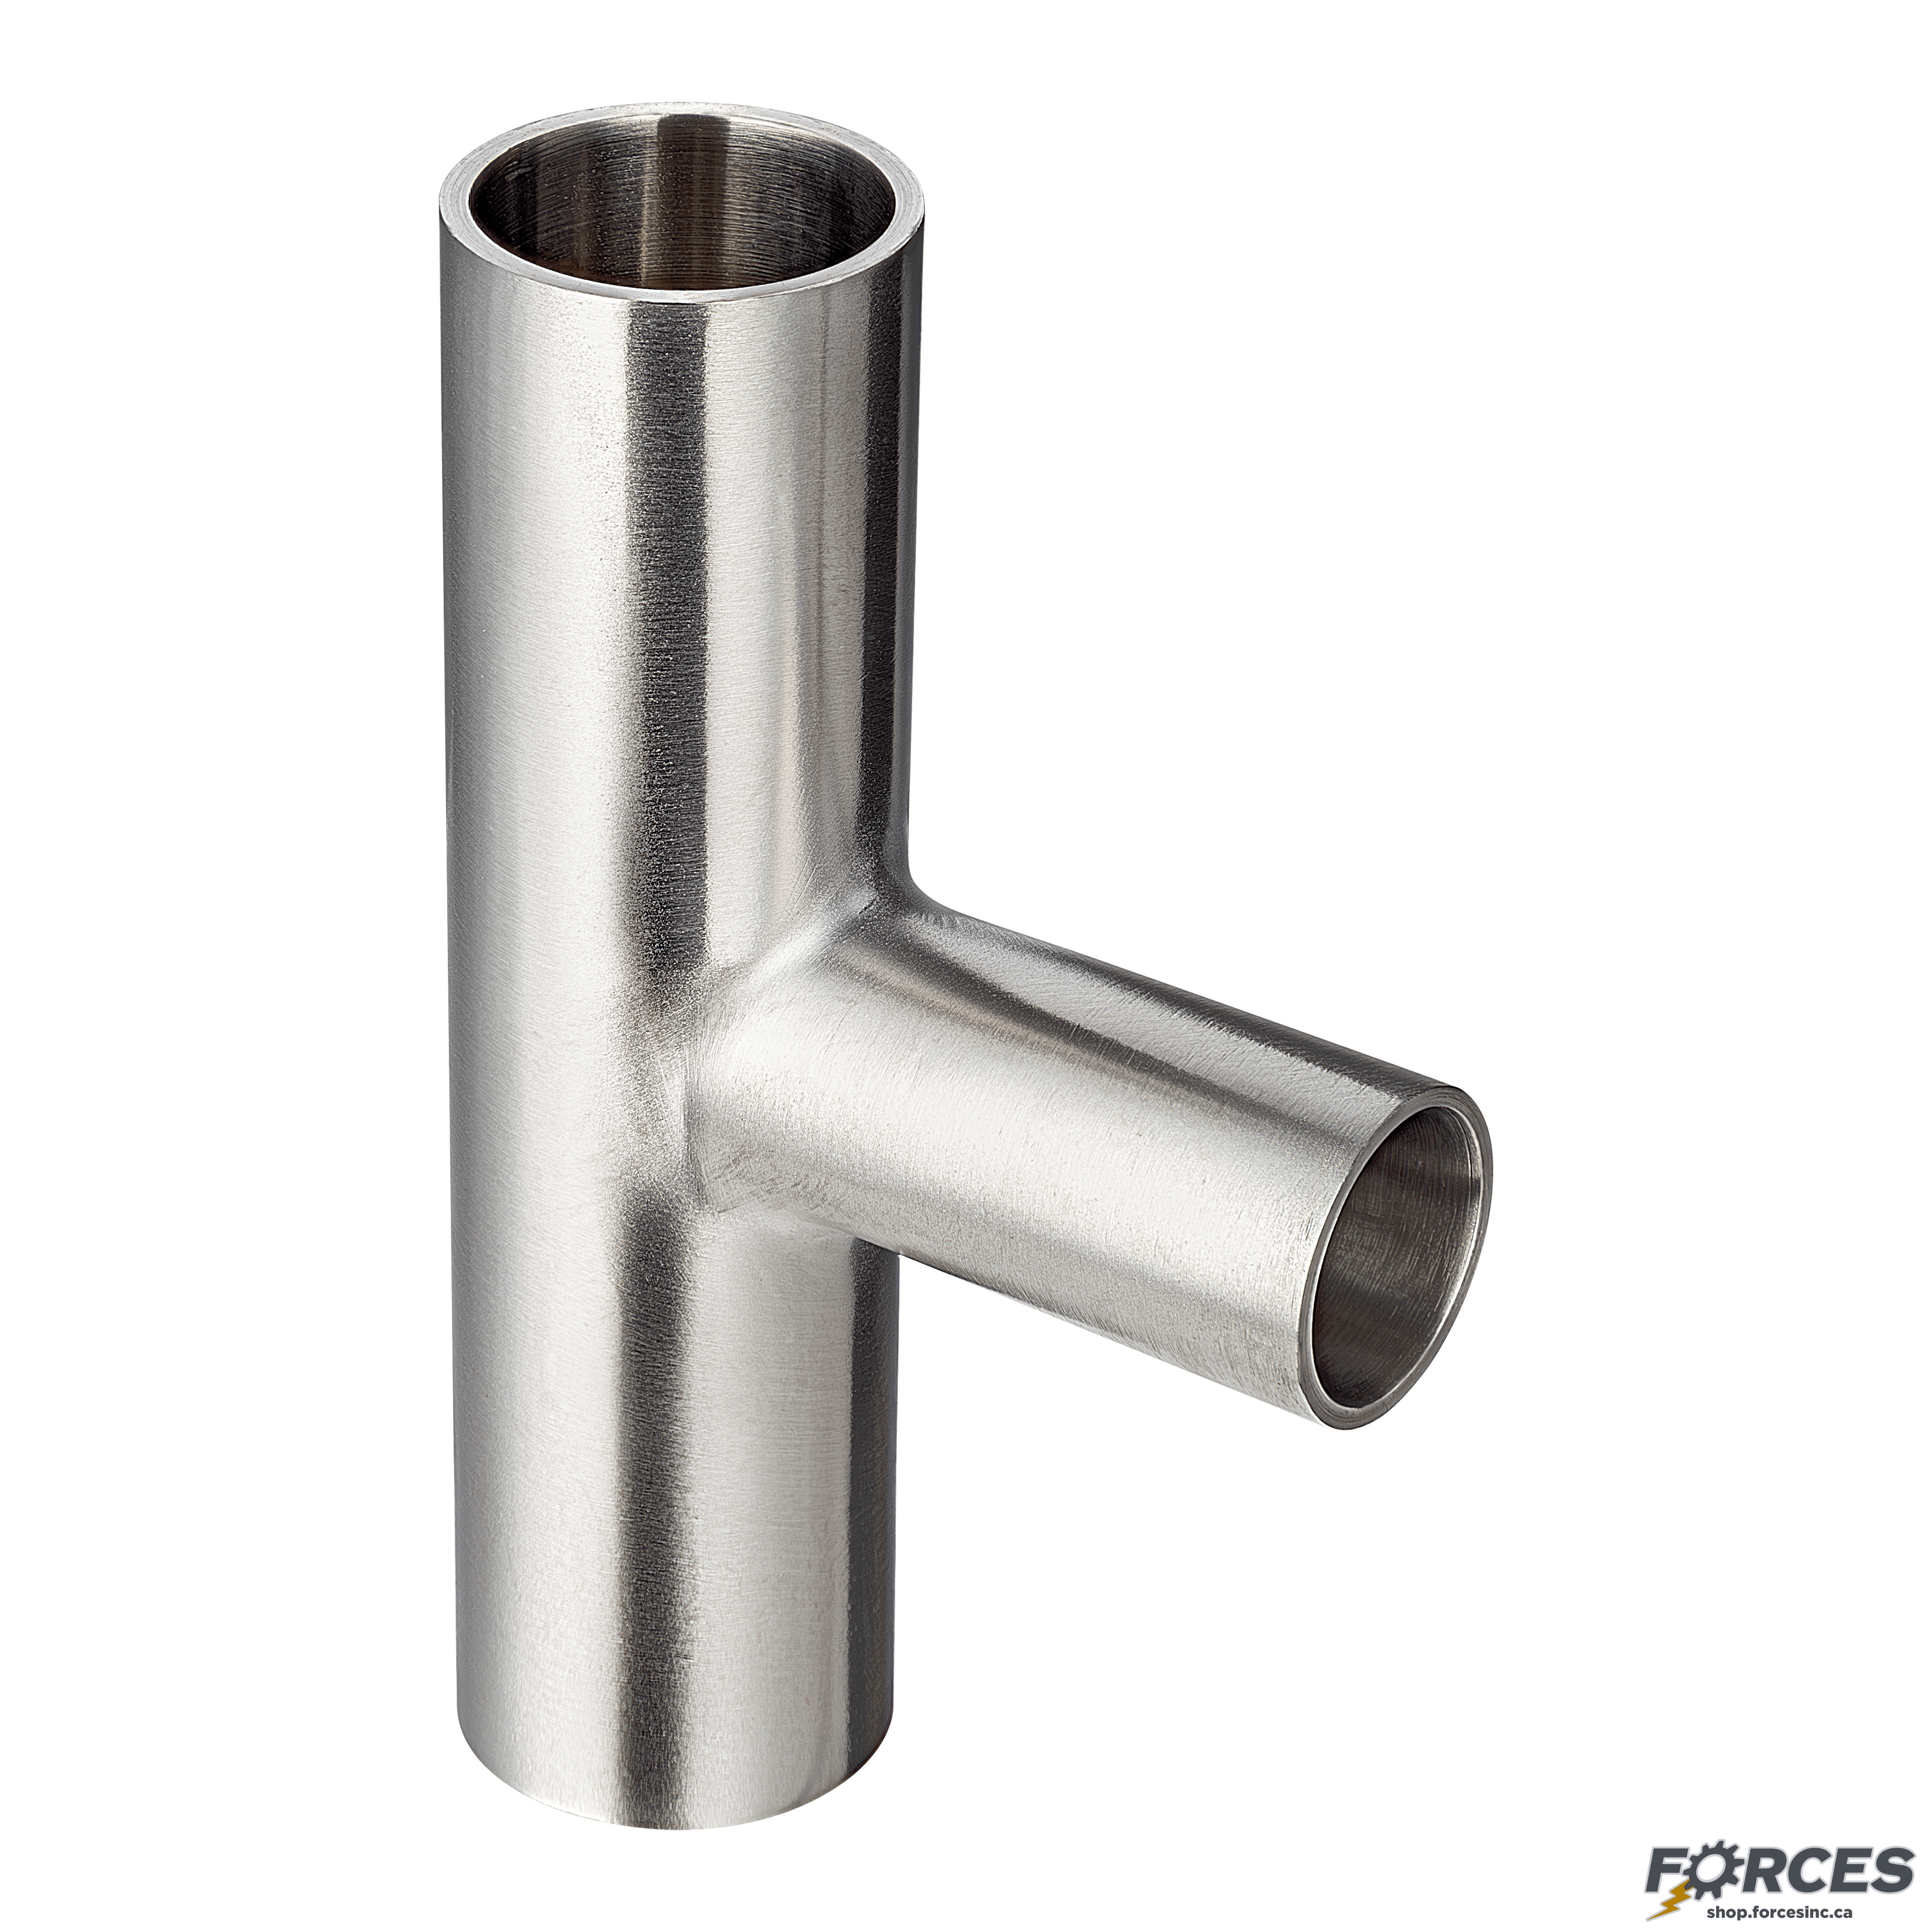 3" x 1-1/2" Butt Weld Tee Reducer - Stainless Steel 316 - Forces Inc